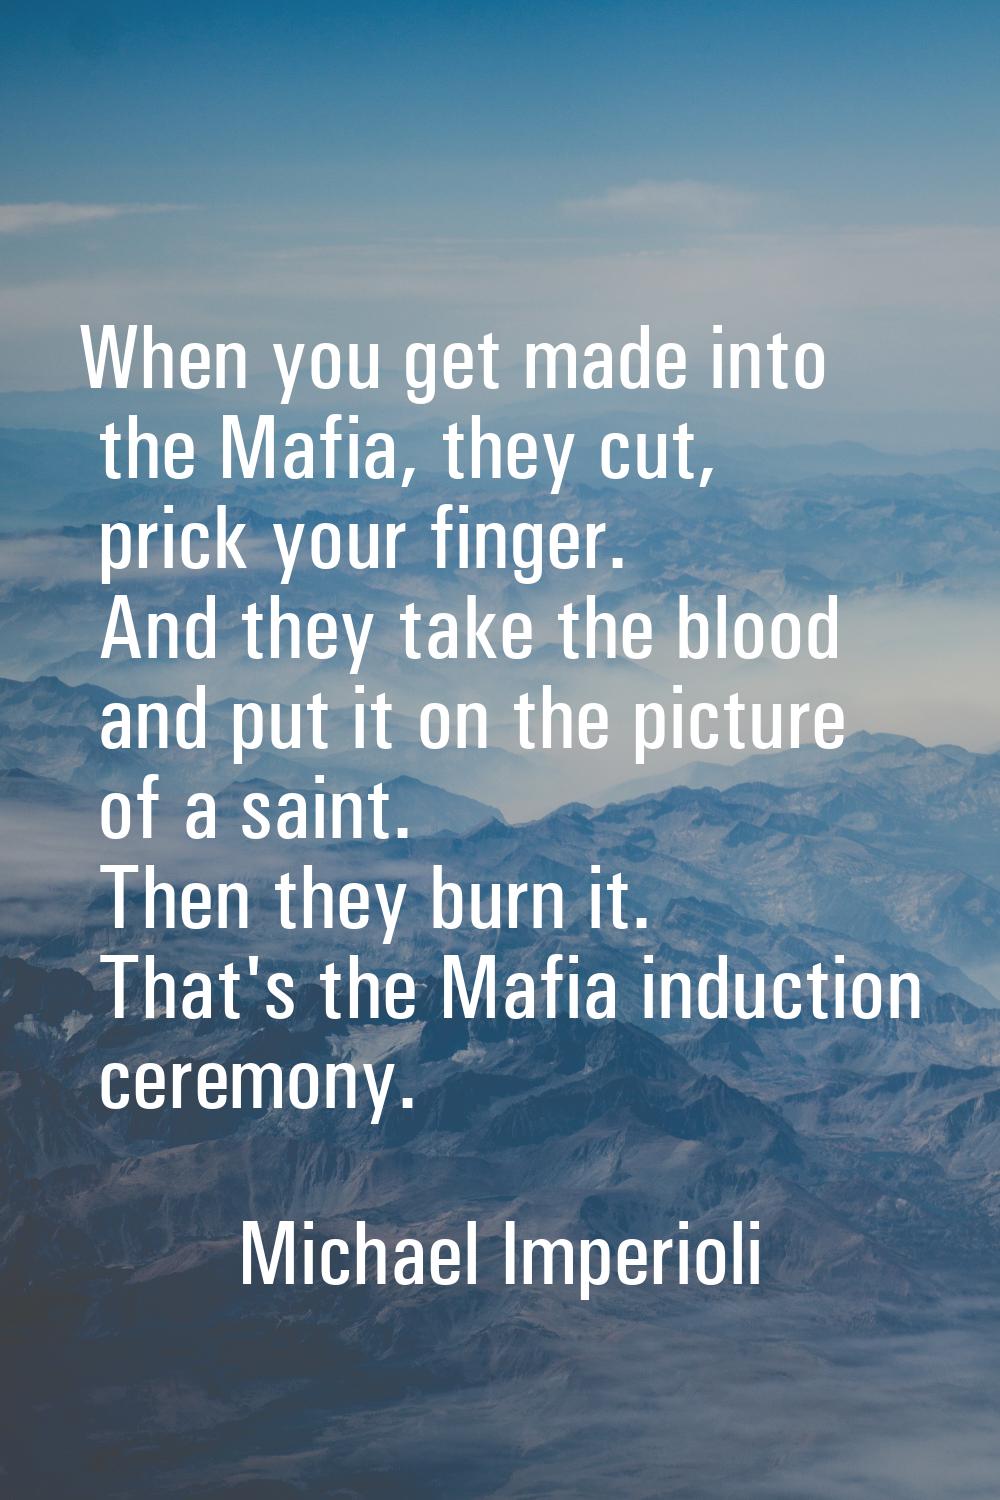 When you get made into the Mafia, they cut, prick your finger. And they take the blood and put it o